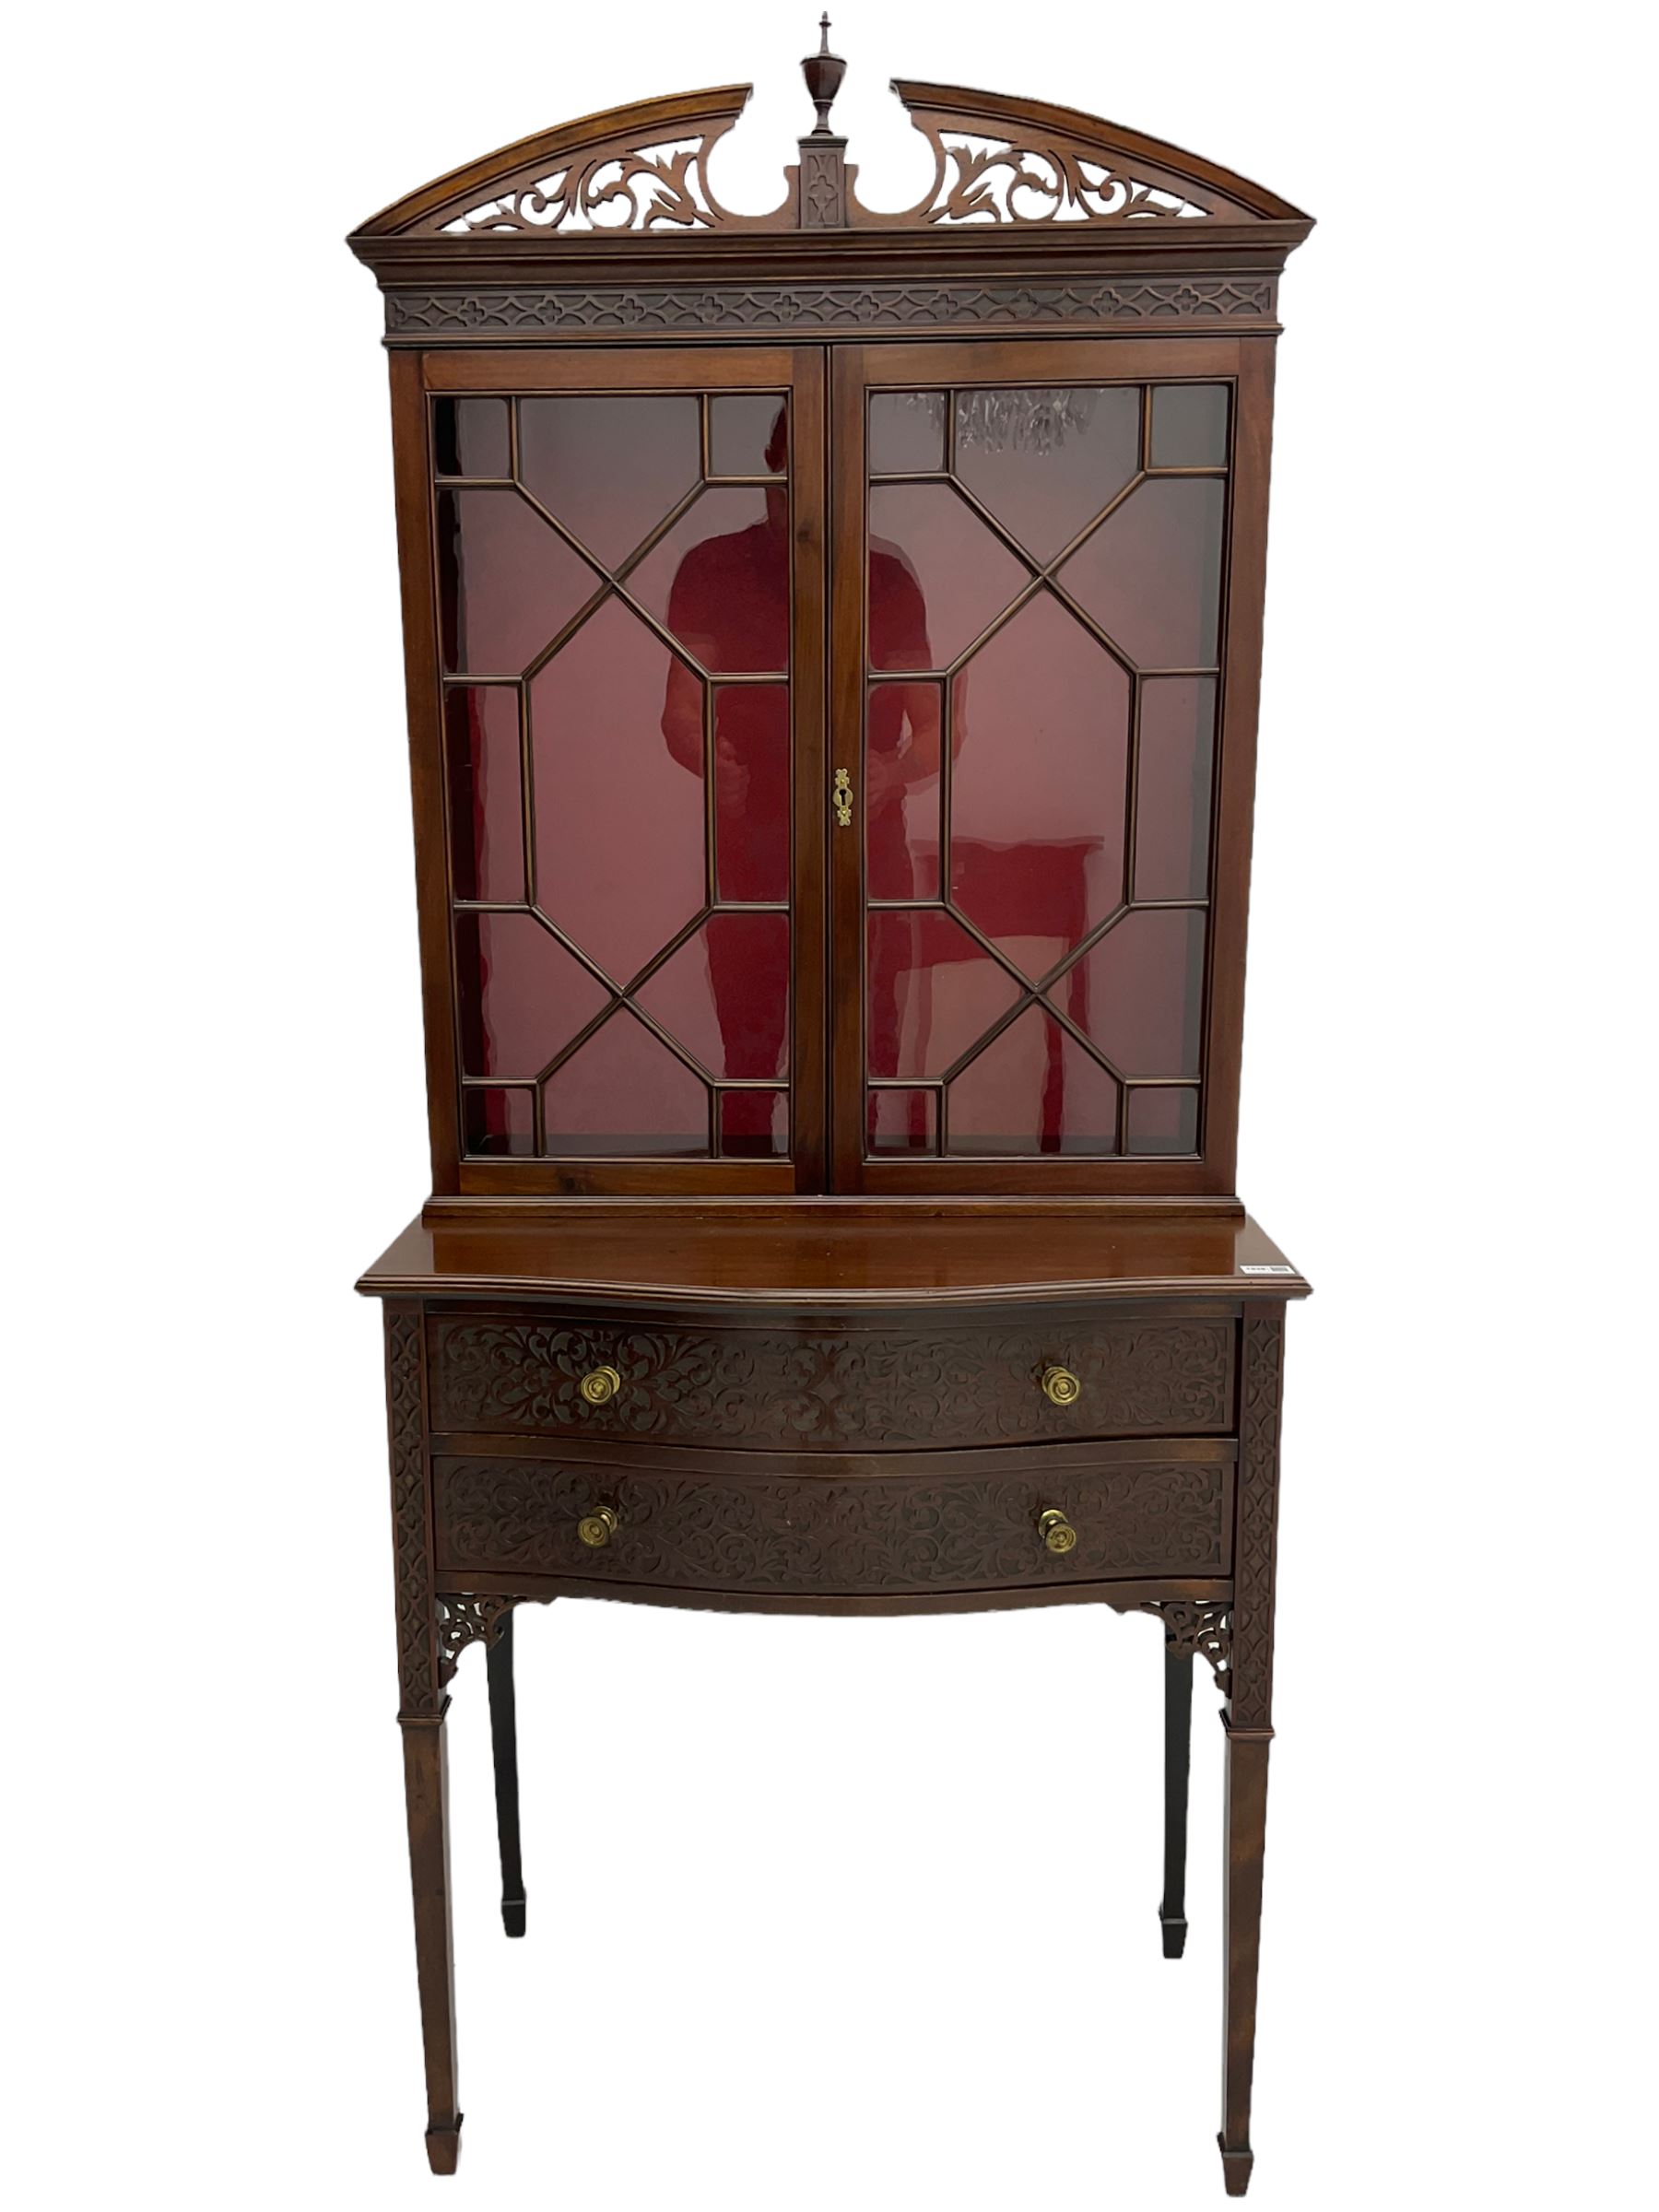 Edwardian mahogany tall and narrow display cabinet with scroll pierced broken arch pediment over two - Image 7 of 7